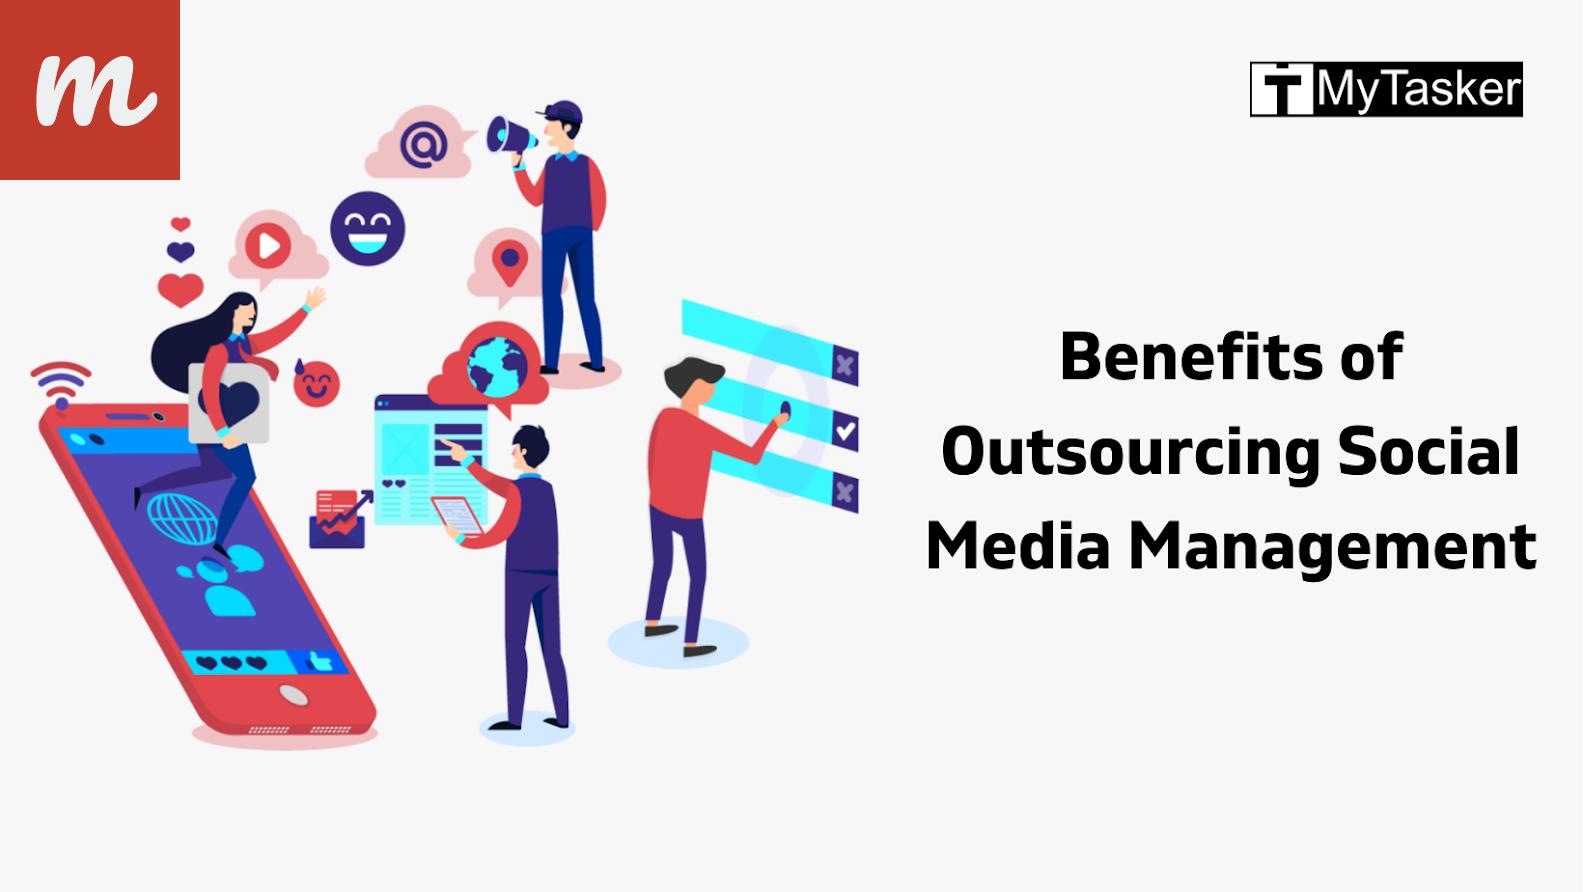 The Benefits of Outsourcing Social Media Marketing
